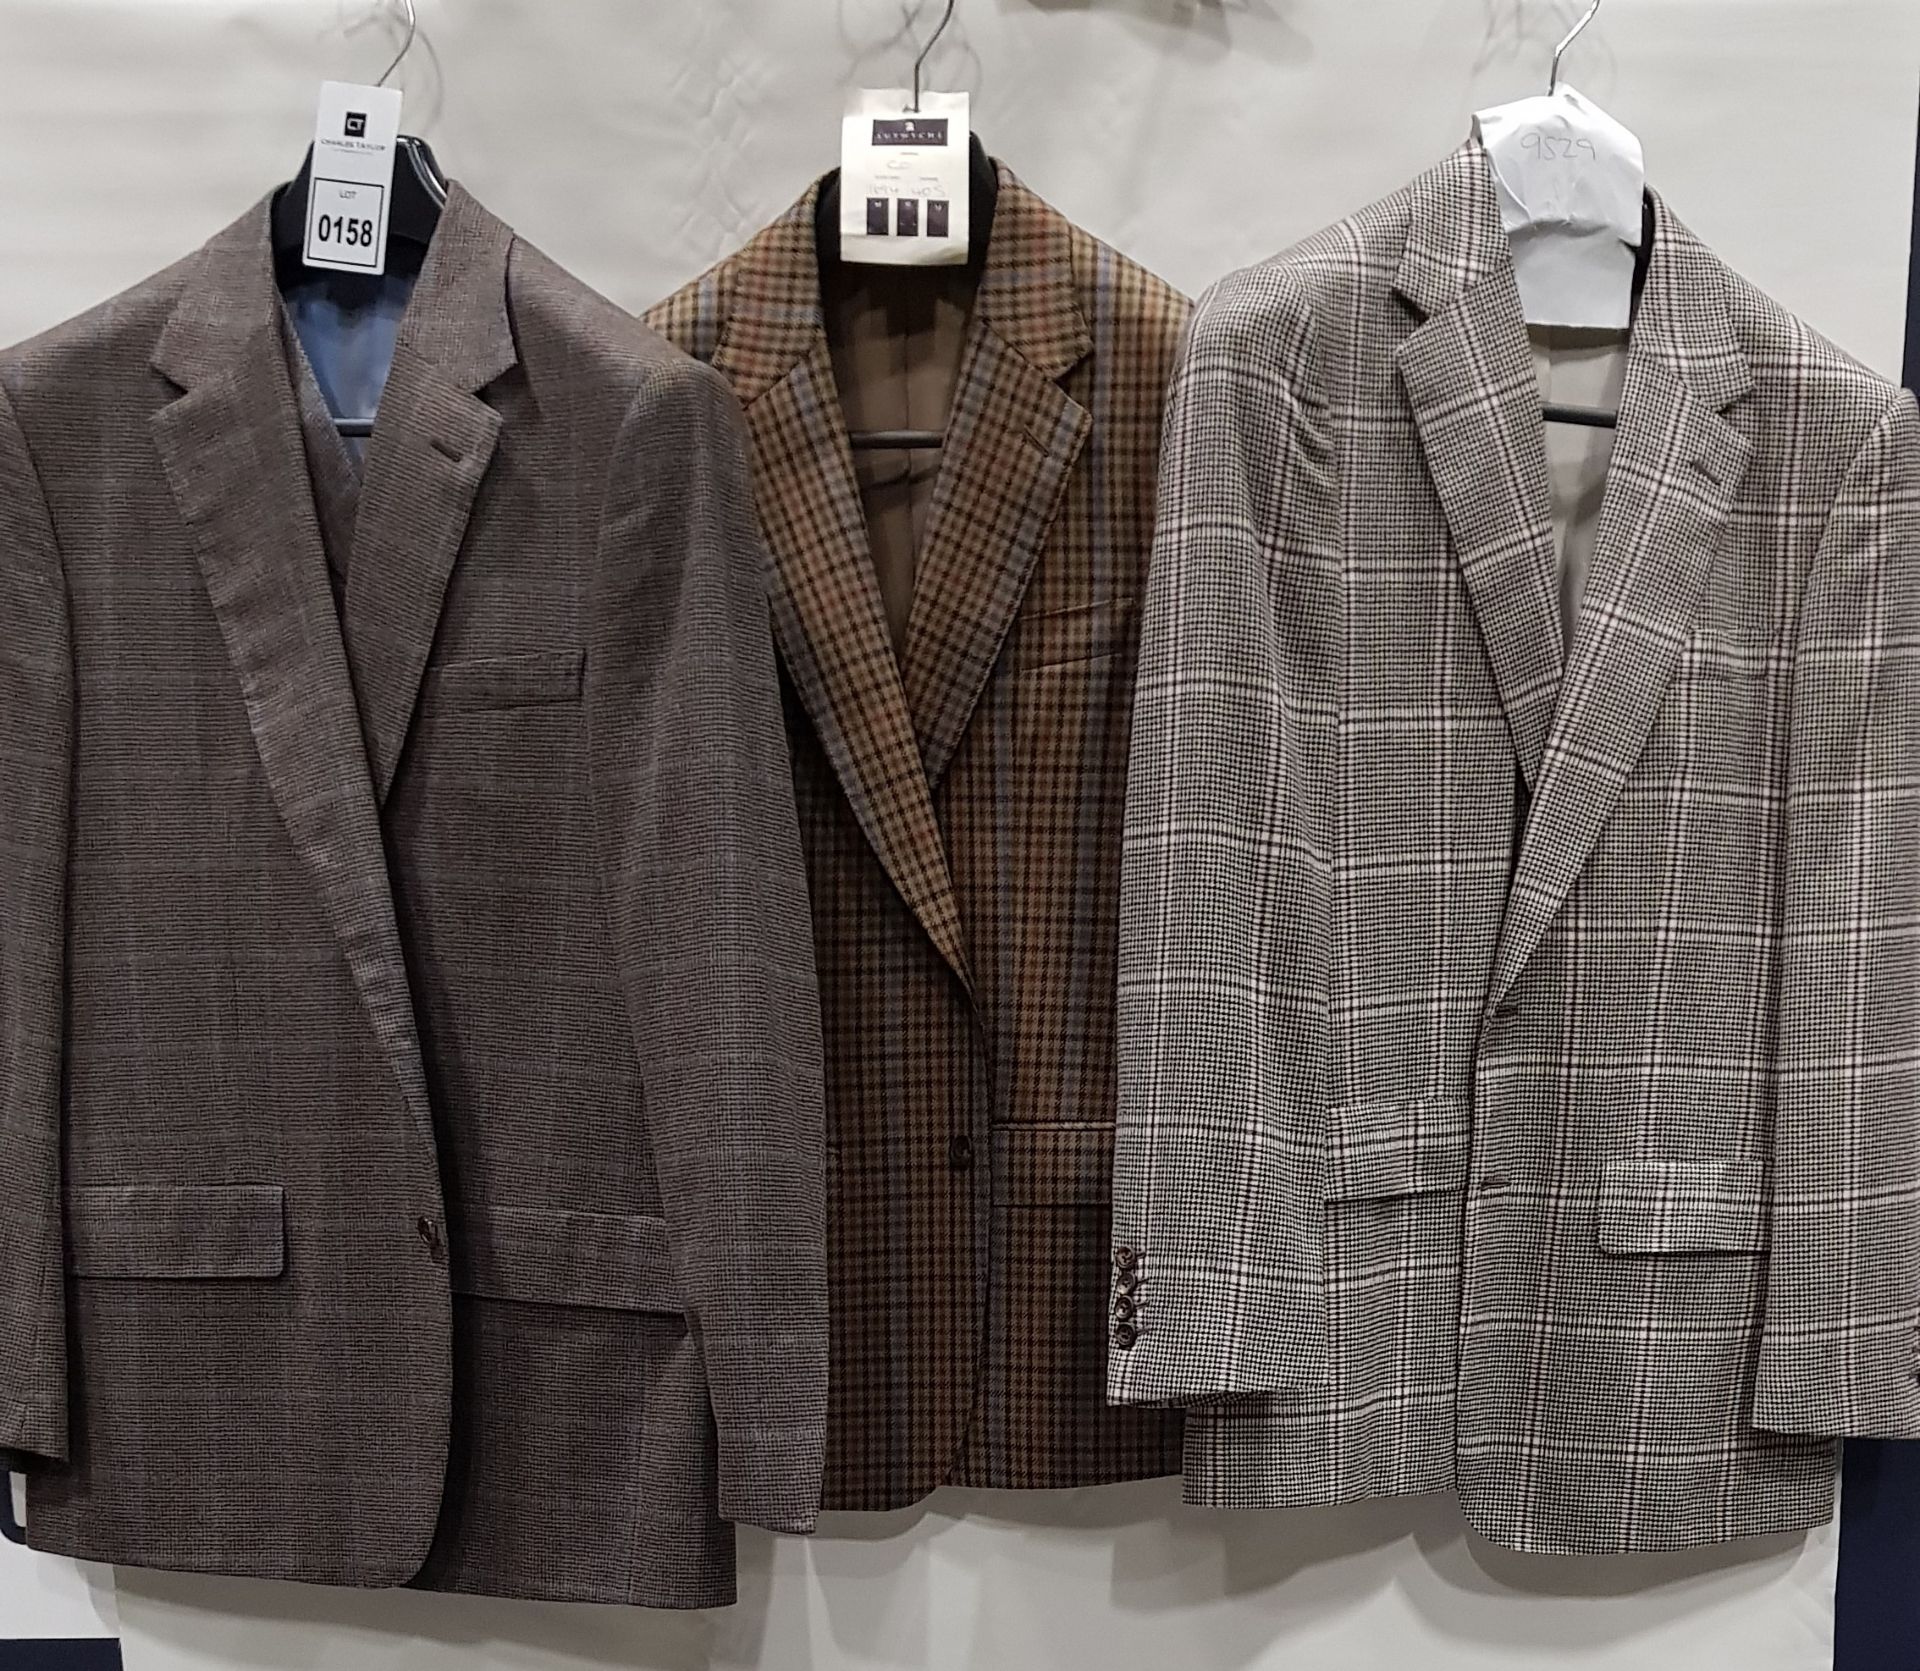 4 X BRAND NEW LUTWYCHE BROWN / BEIGE JACKETS SIZES 46R, 40S, 40R, 46R (NOTE NOT FULLY TAILORED)